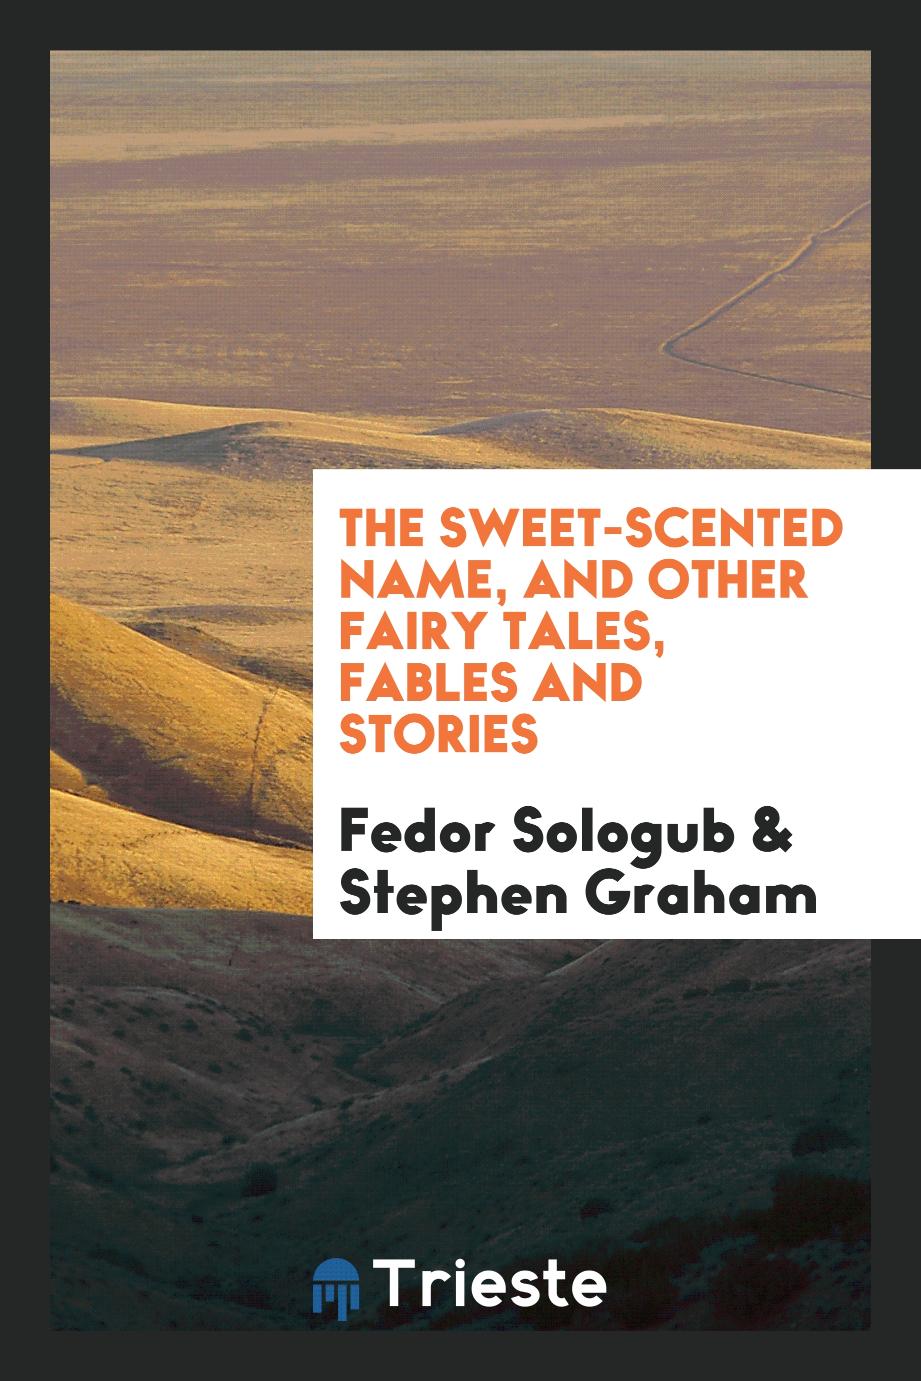 The sweet-scented name, and other fairy tales, fables and stories